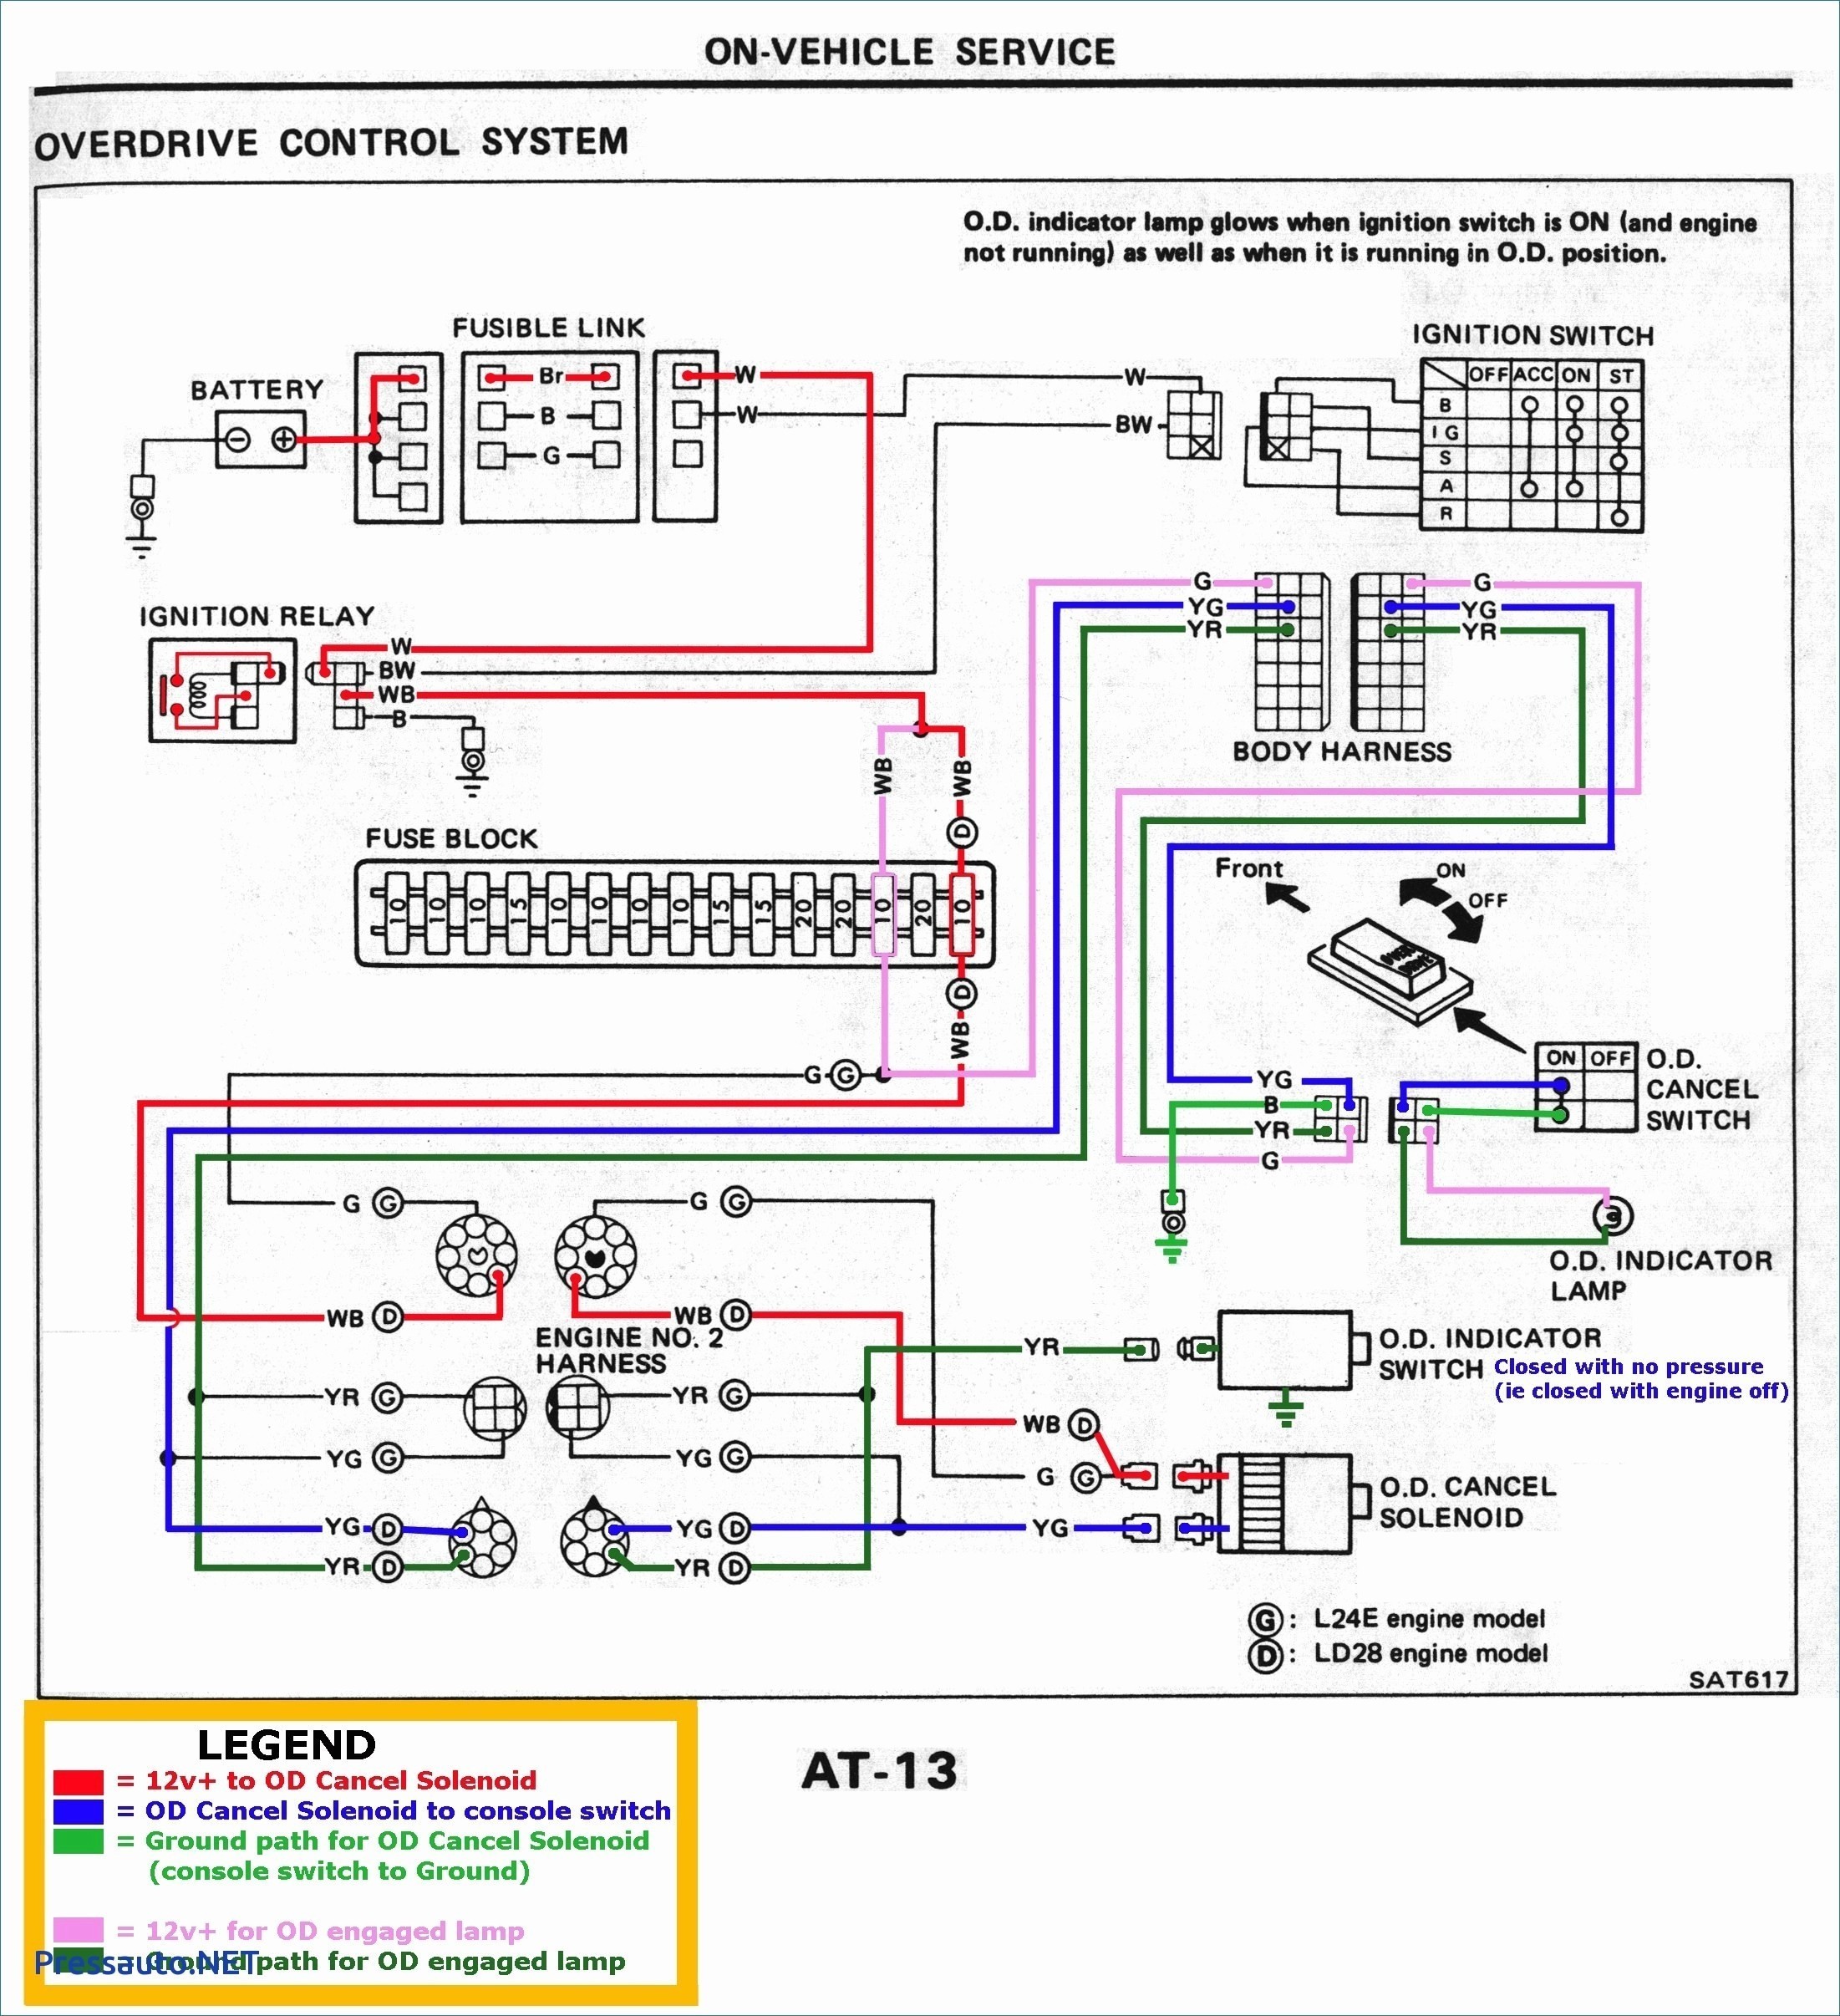 2004 Volvo S40 Engine Diagram Used Switched Receptacle Wiring Diagram • Electrical Outlet Symbol 2018 Of 2004 Volvo S40 Engine Diagram